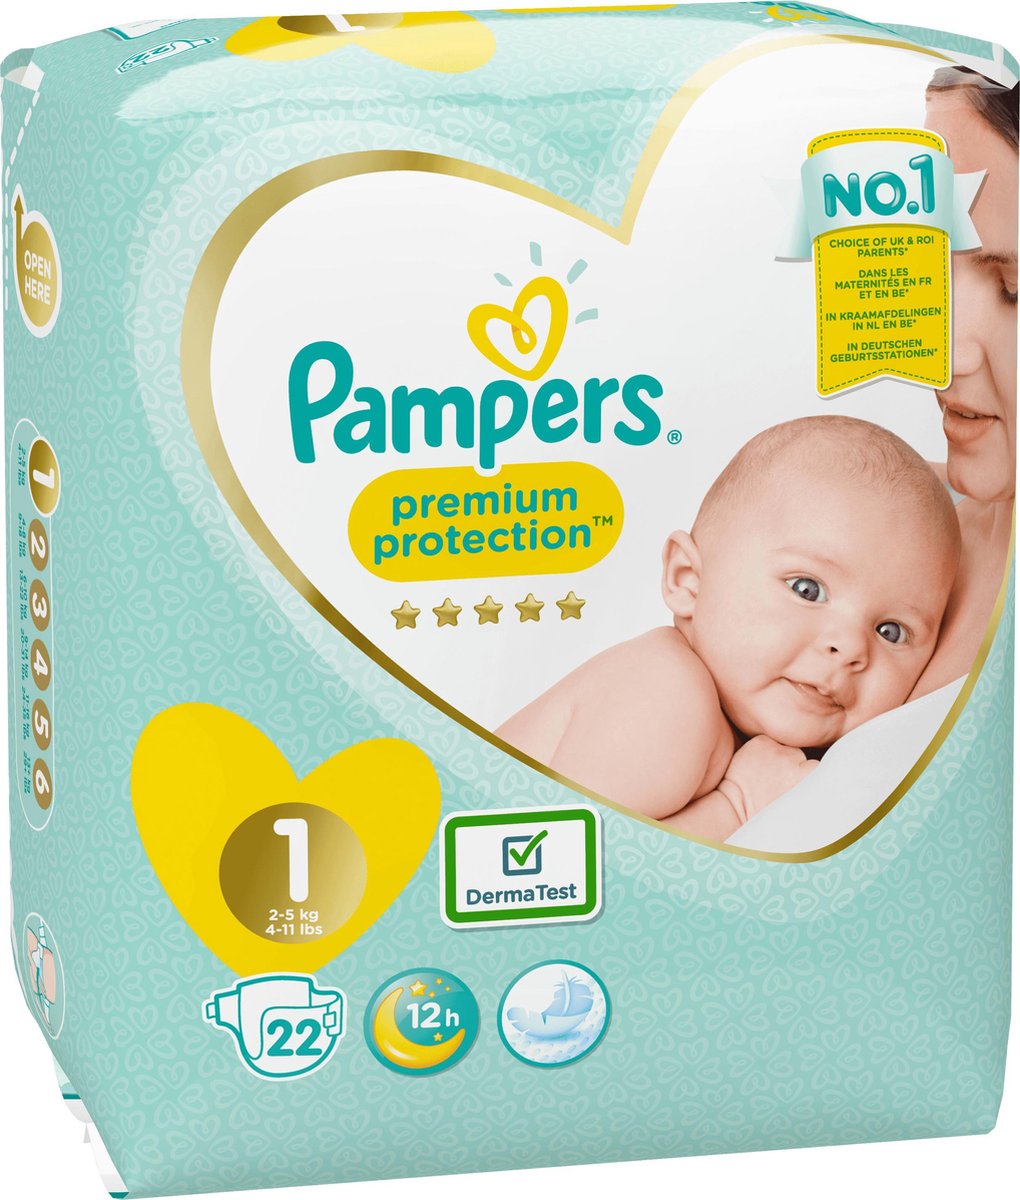 Pampers Couches Harmonie taille 1 Newborn 2-5 kg (180 pcs), taille